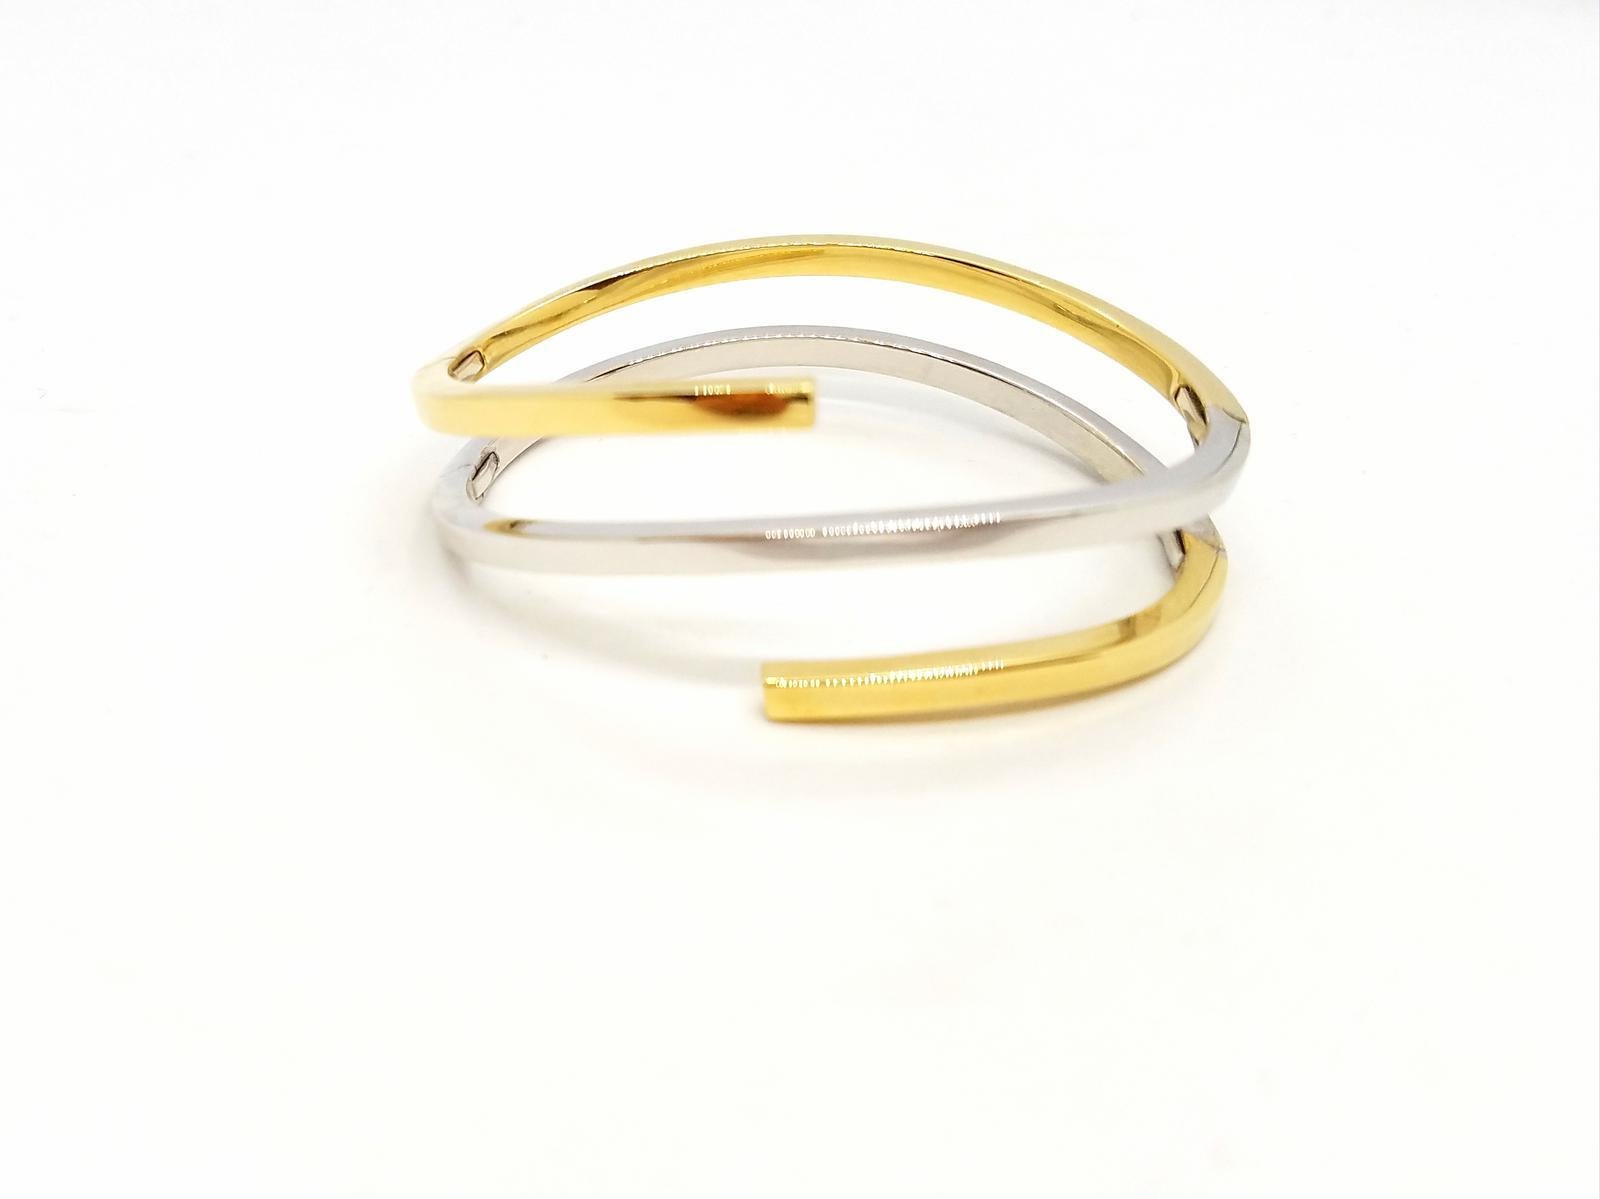 Bracelet rigid hinged. two colors. white and yellow gold 750 mils (18 carats). opening into 5 parts. square wire. size: 19 cm. total width: 2.6 cm. width of a wire: 0.34 cm. total weight: 26.22 g. punch on the end. excellent condition
